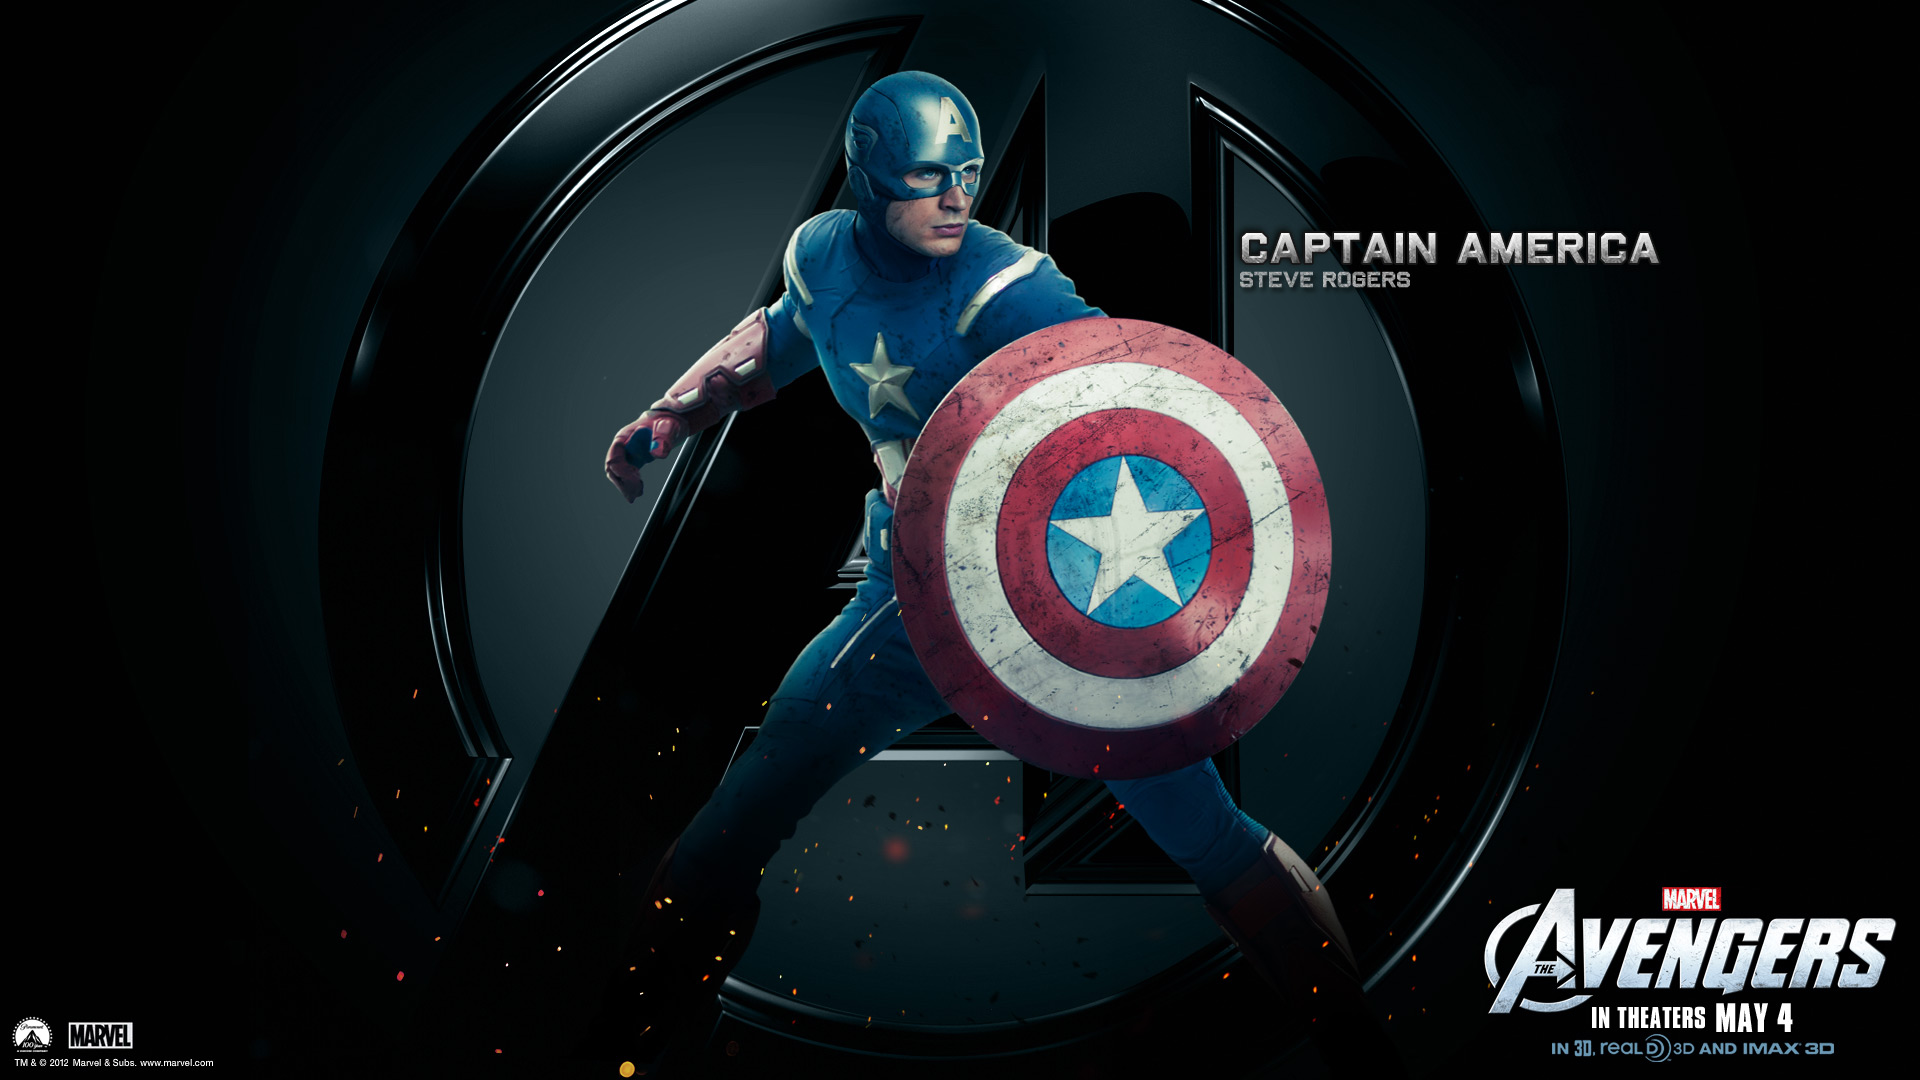  Marvels Avengers Wallpapers HD The Avengers Captain America HD 1920x1080